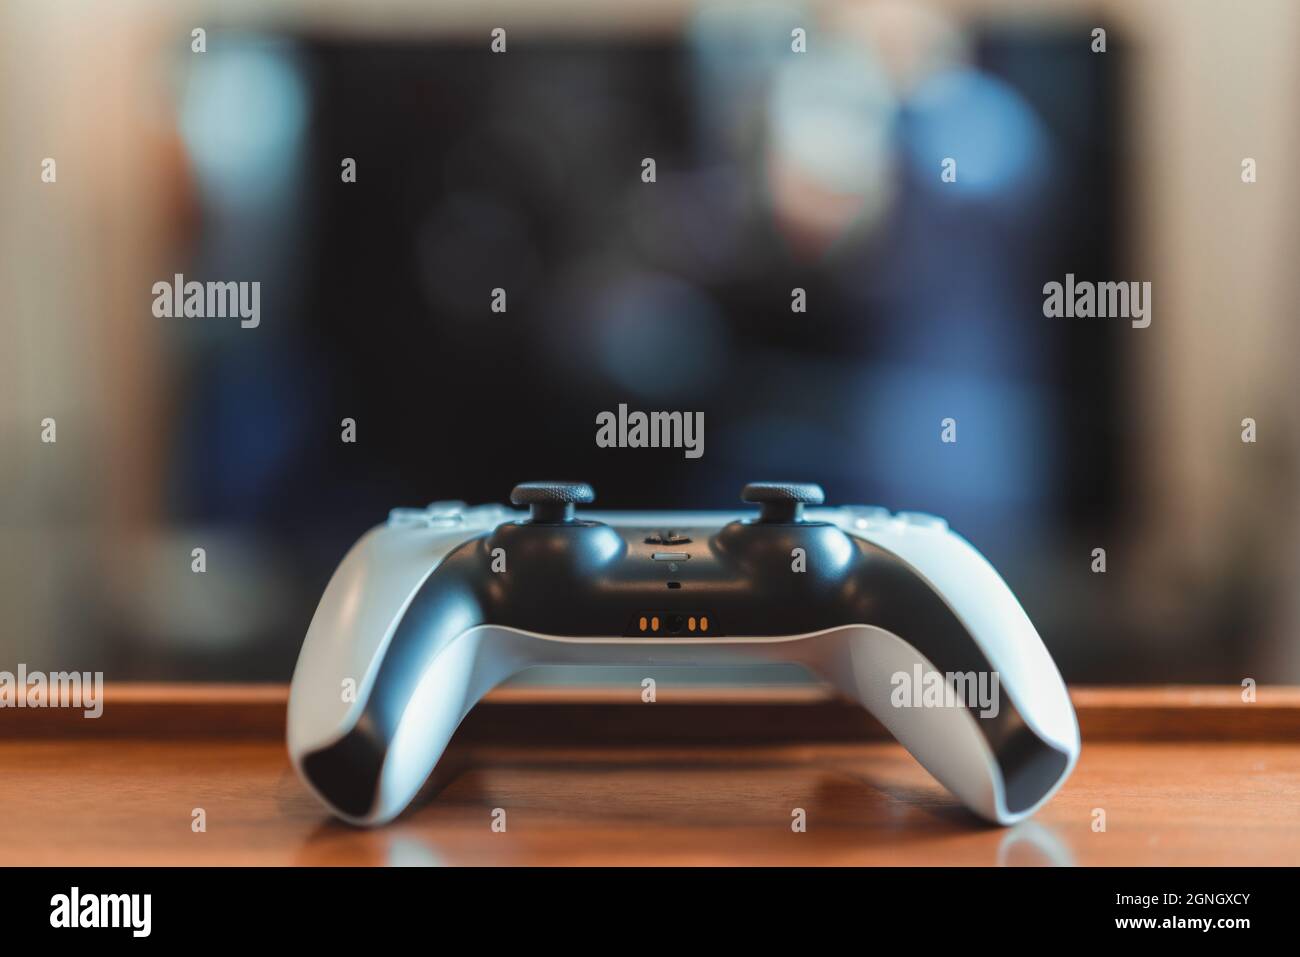 London, UK - May 25, 2021: Close up of Playstation 5 (PS5) controller on the table, tv on background, selective focus. Playstation 5 is the latest vid Stock Photo